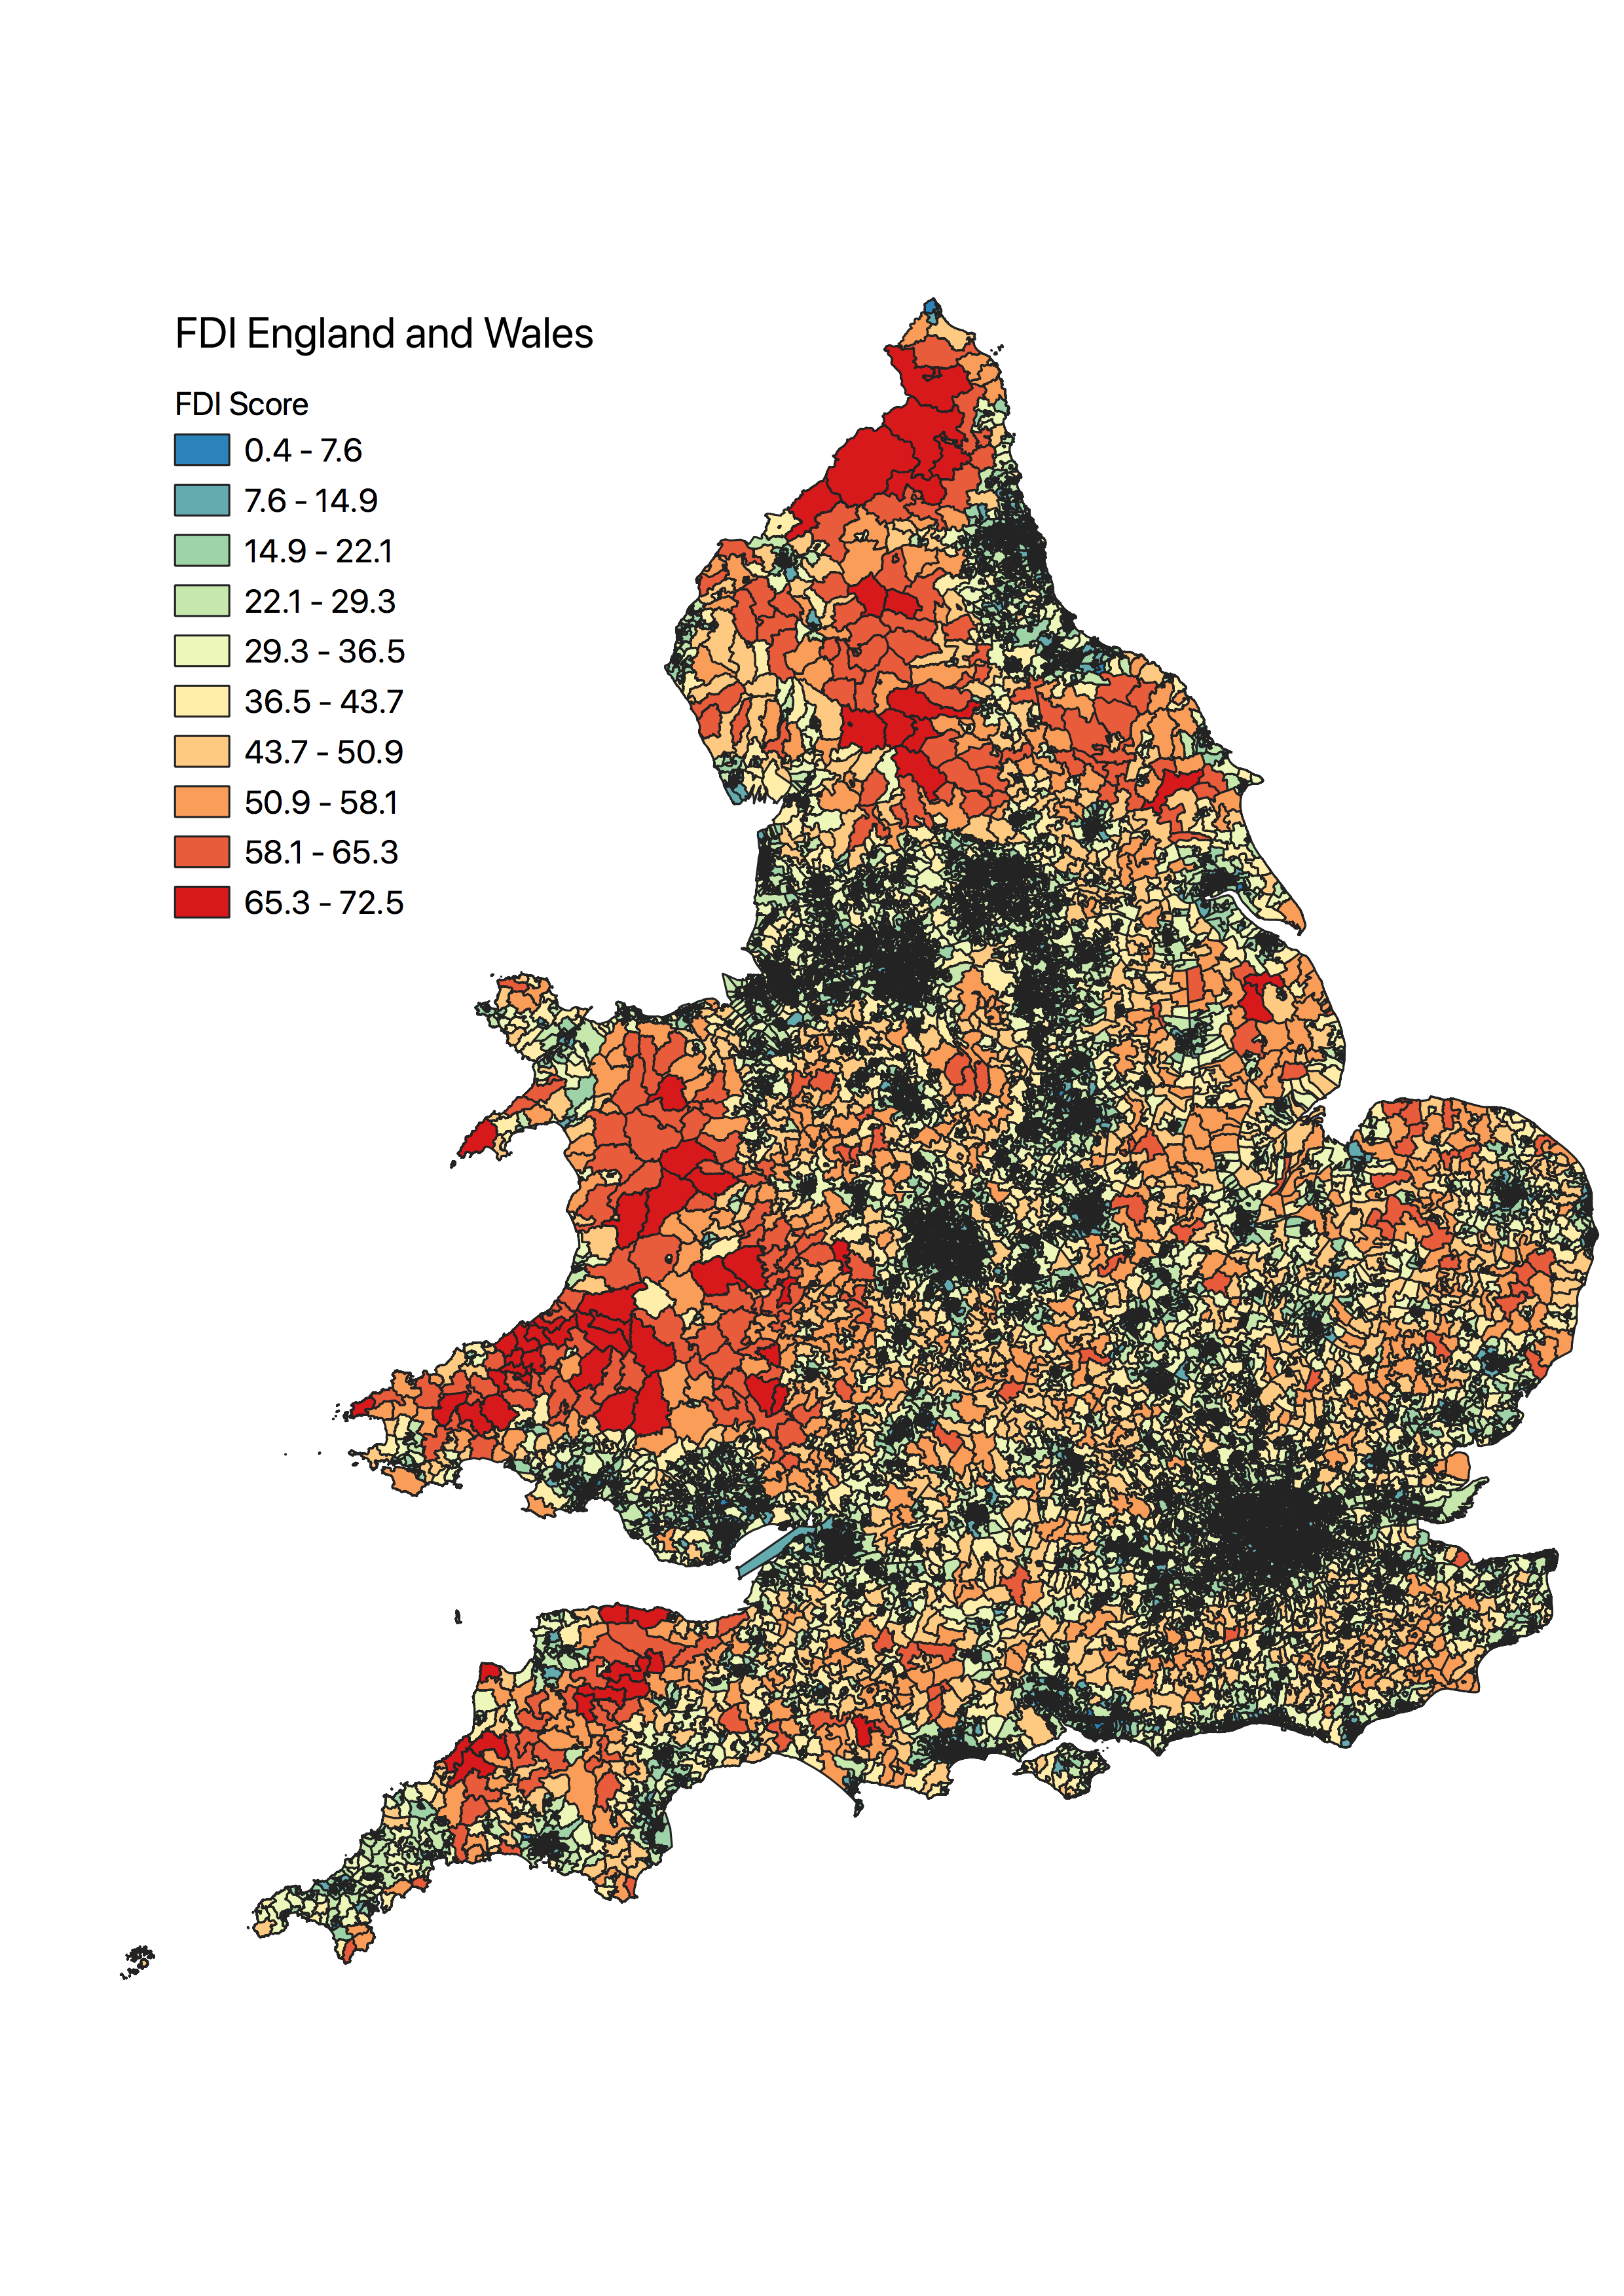 Map showing FDI score across England and Wales - highest scores in the North of England, Wales and Devon